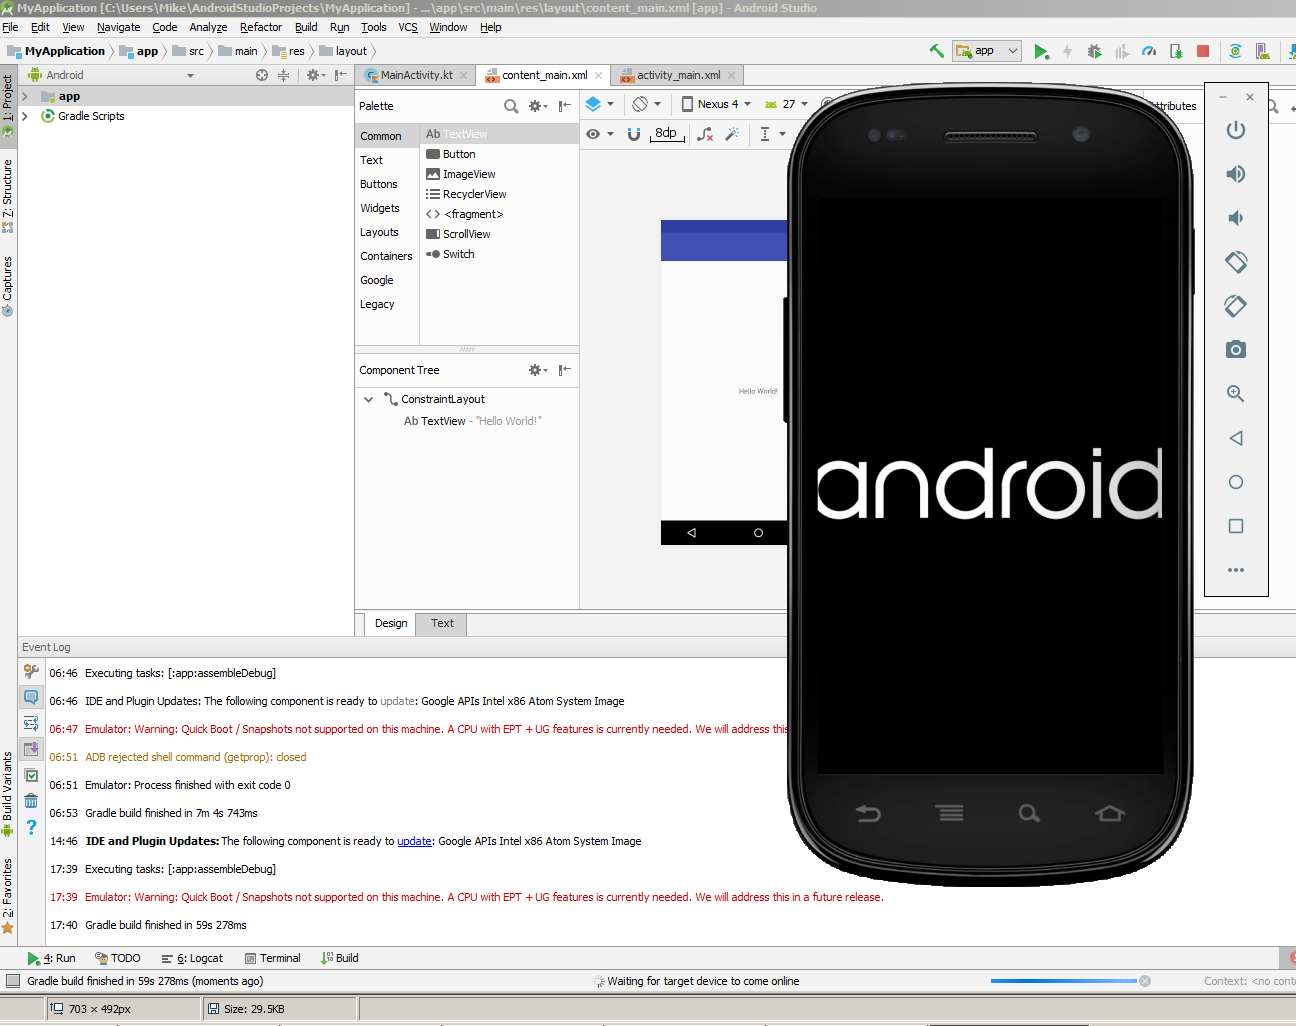 Android Studio emulator problem | Android Forums